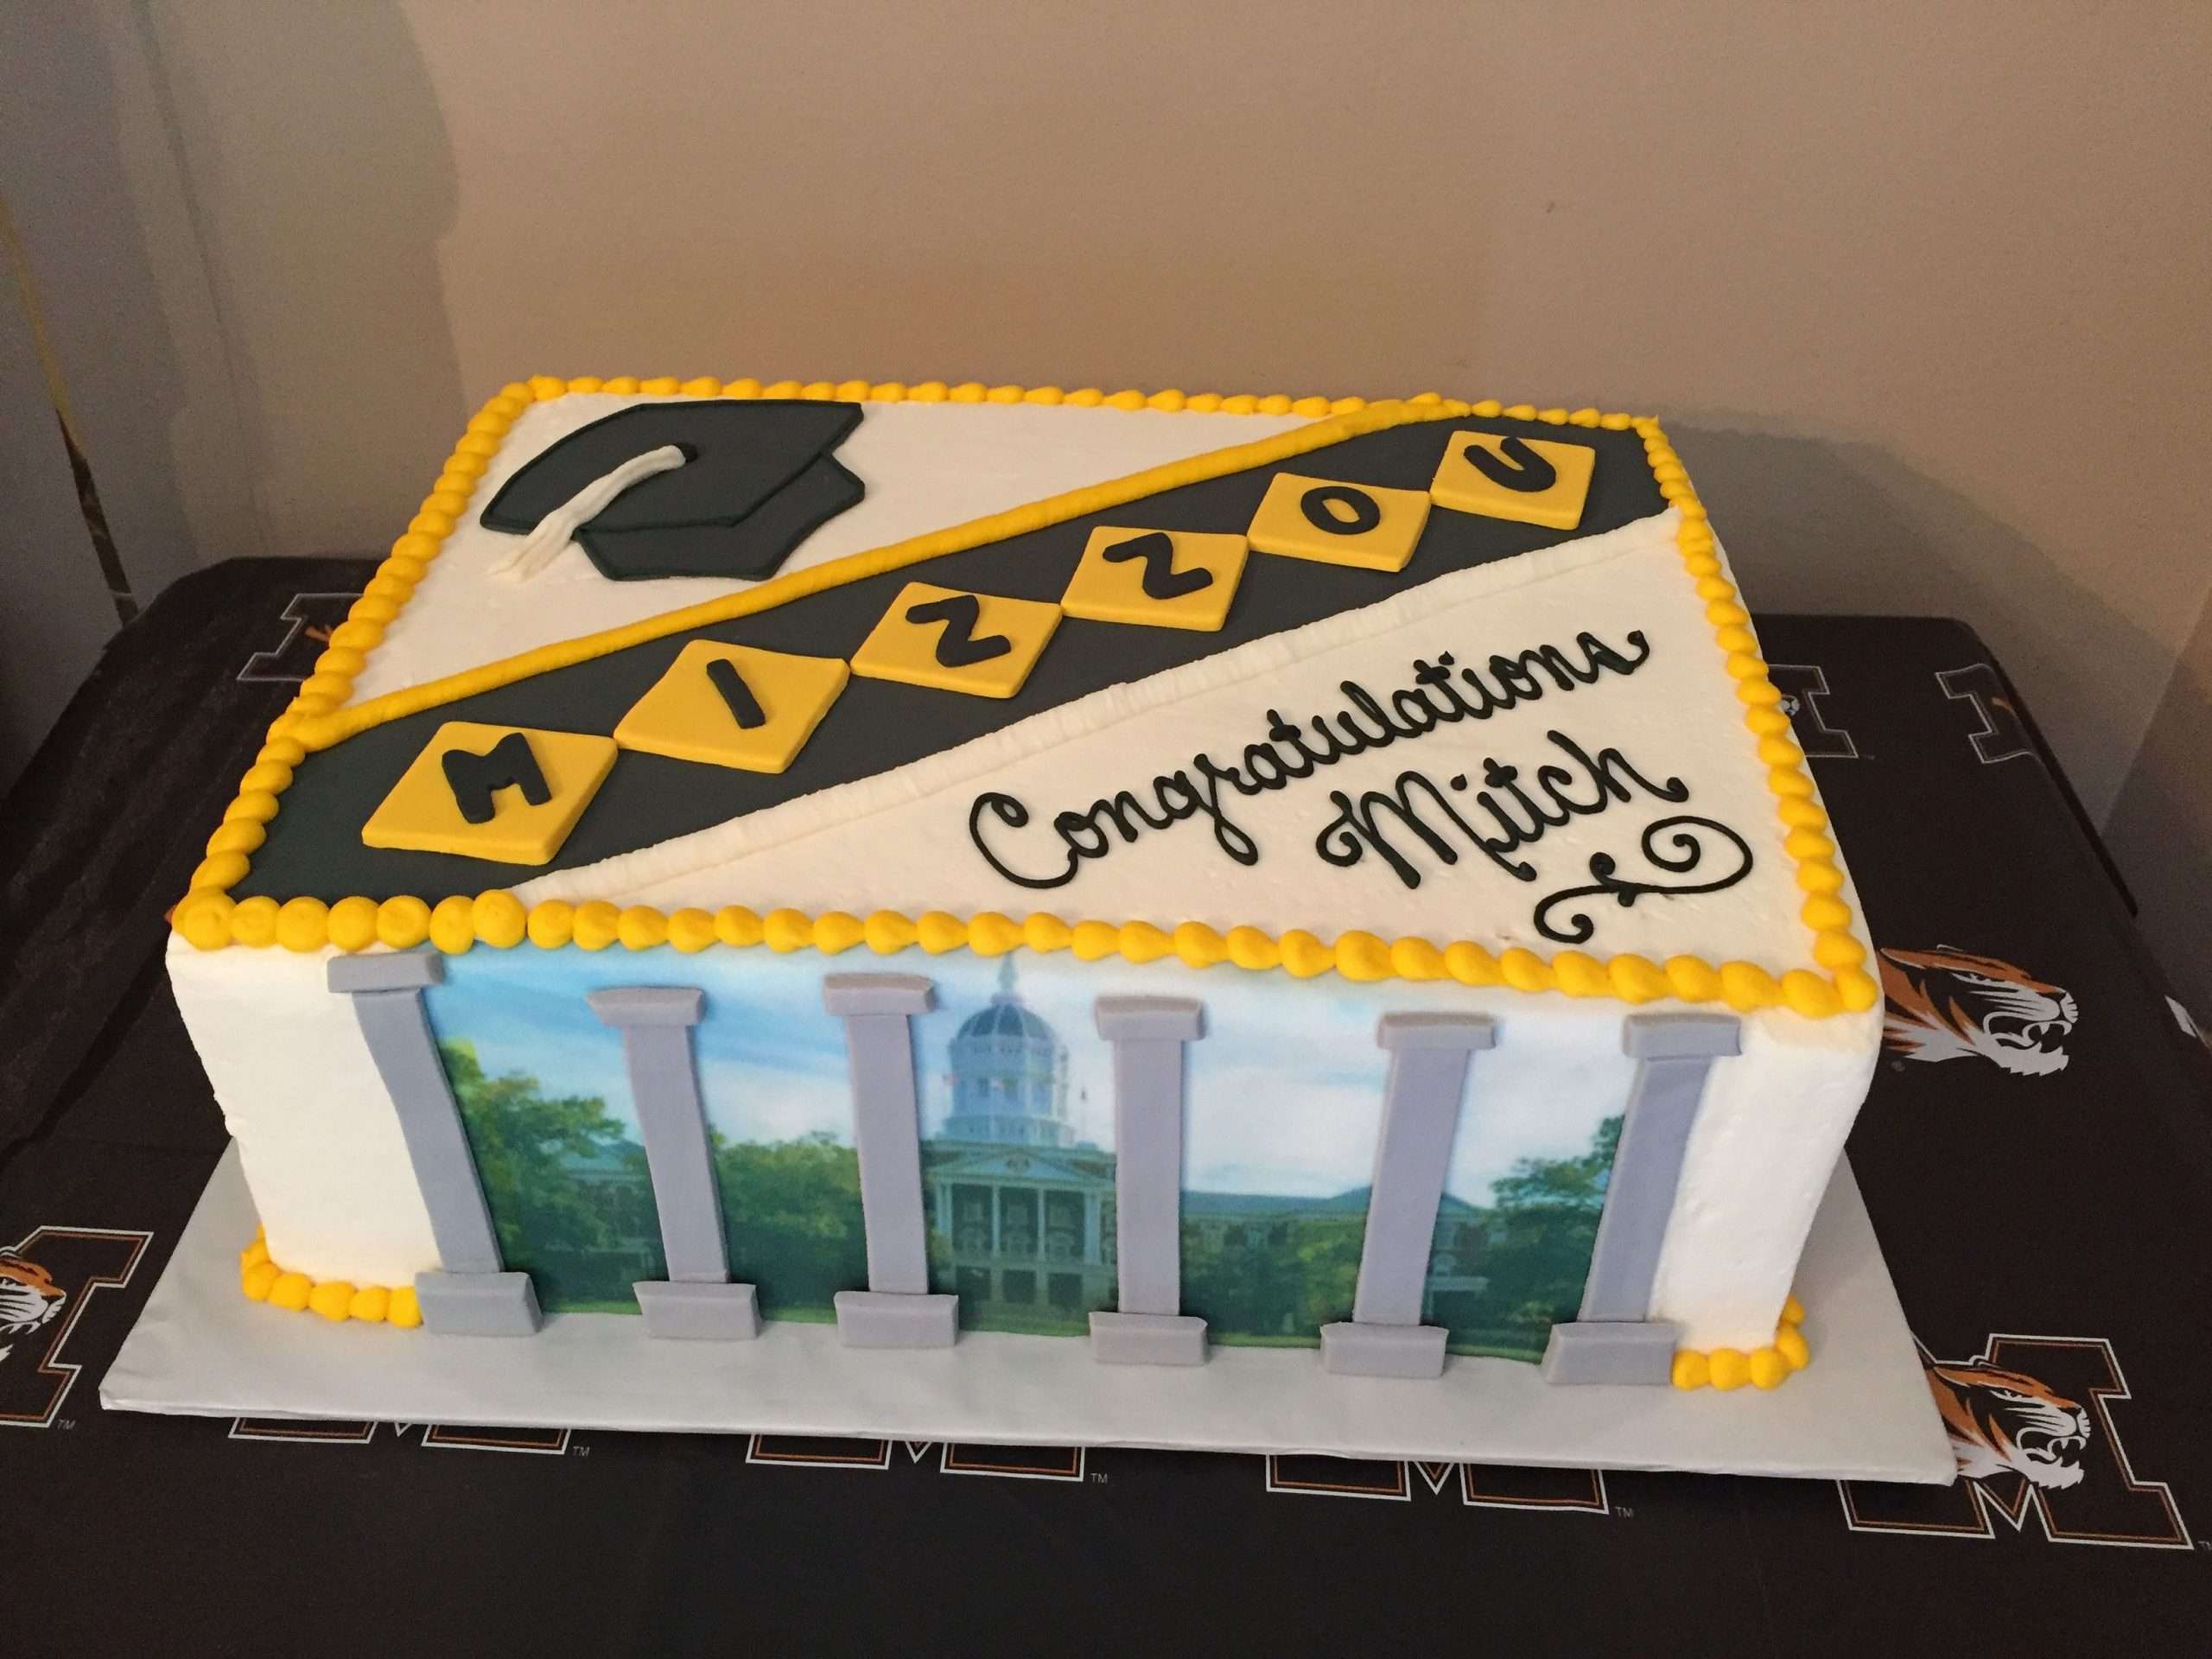 Mitchs Graduation cake Made by sugar on top bake shop ...